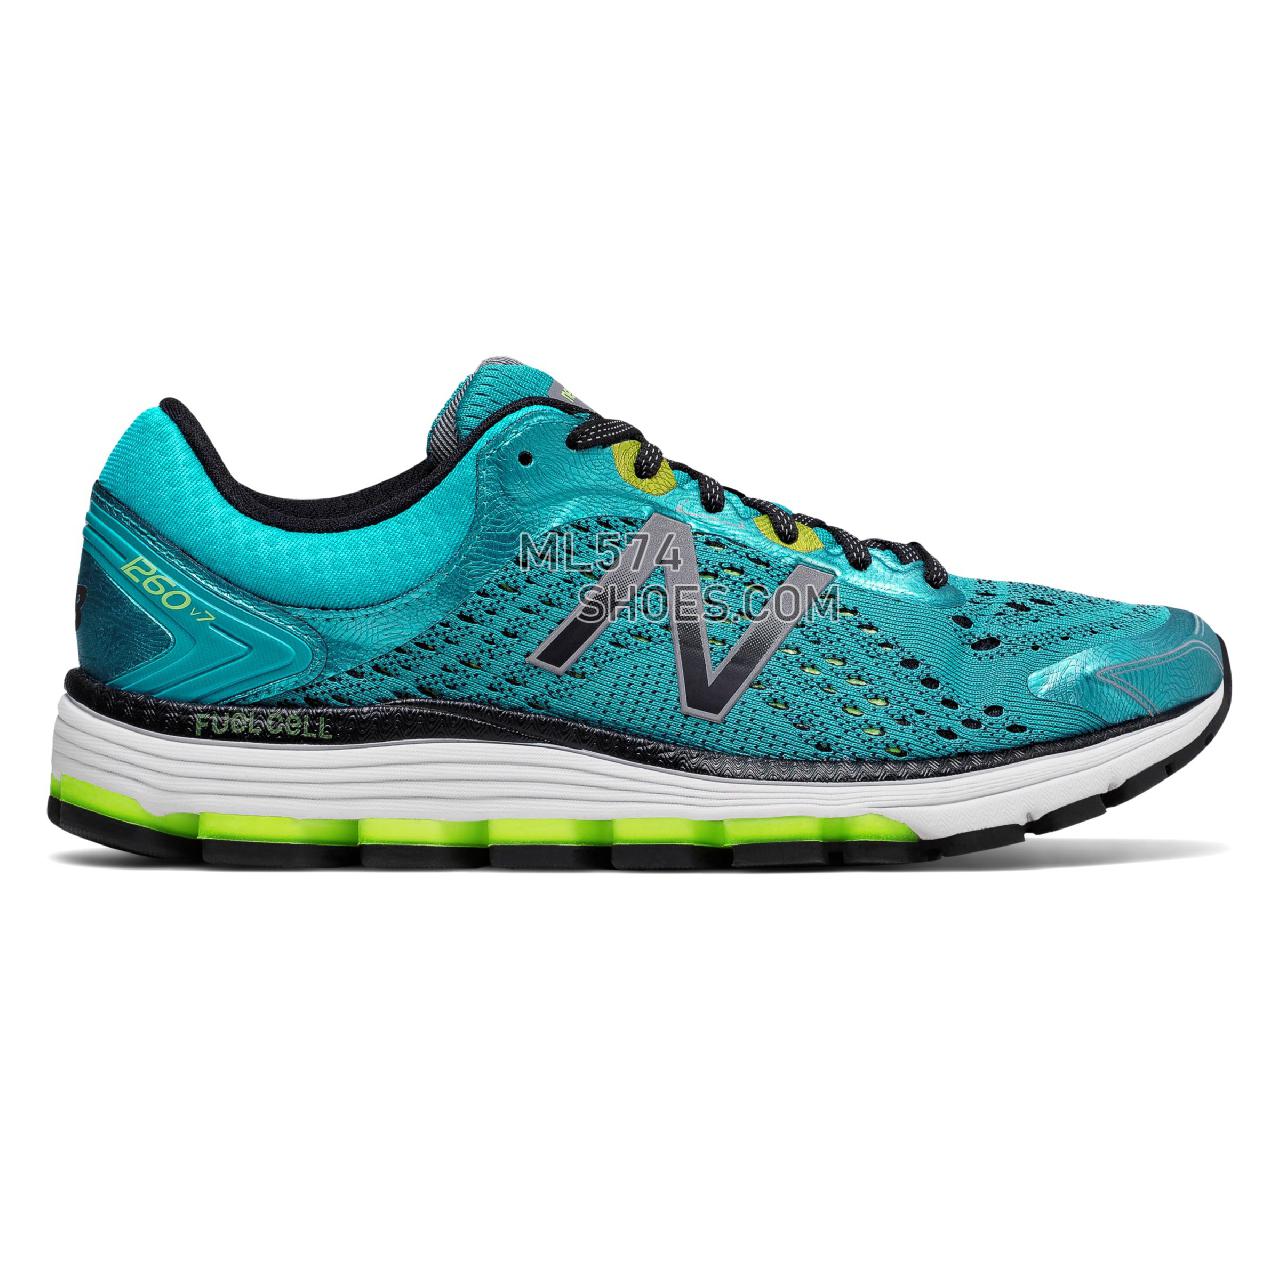 New Balance 1260v7 - Women's 1260 - Running Pisces with Lime Glo - W1260BY7